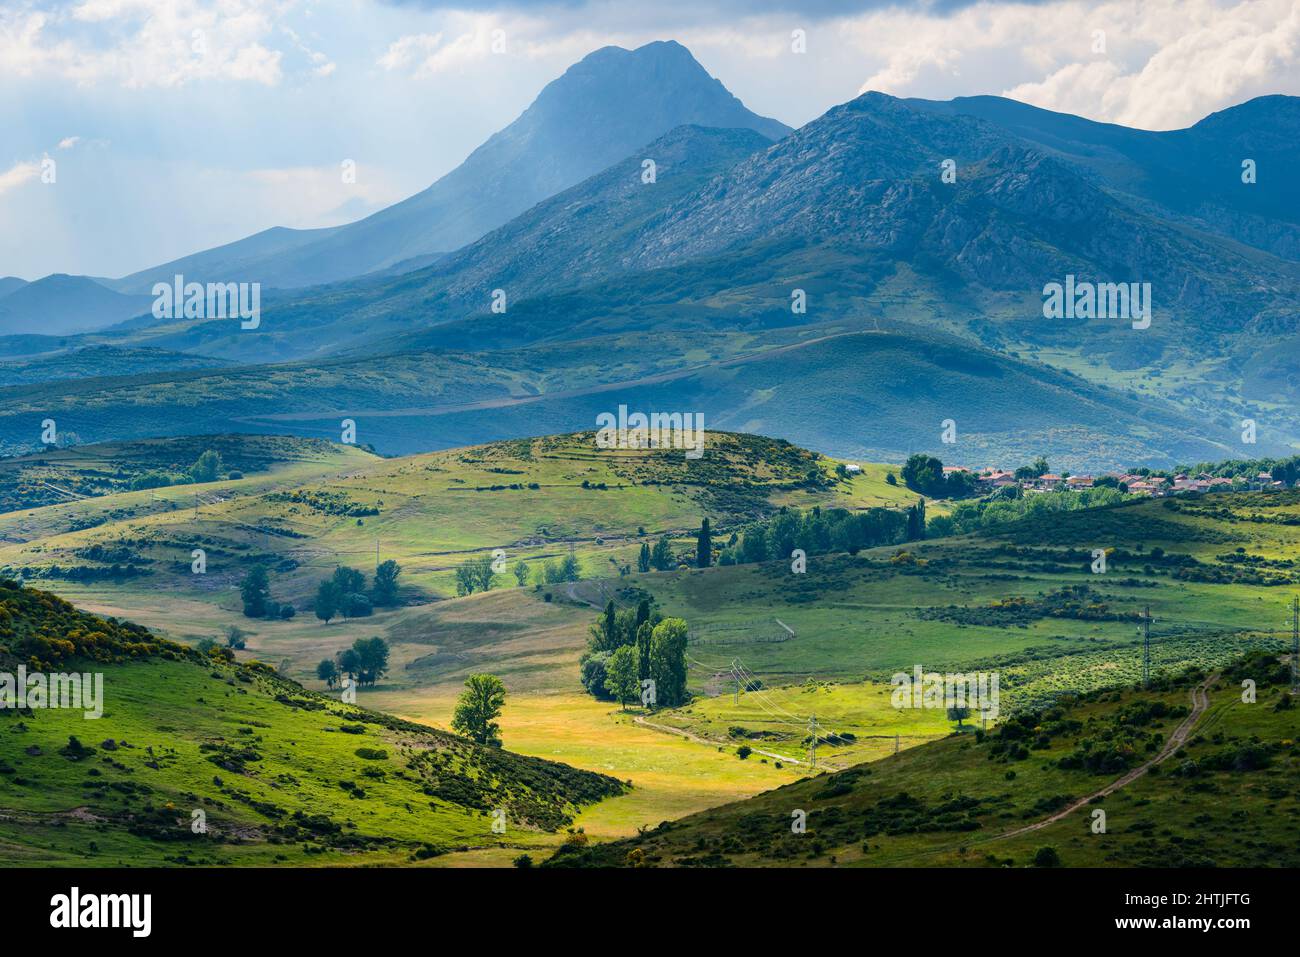 Spectacular scenery of small settlement located on grassy hill slope near massive mountain range against cloudy sky in sunlight Stock Photo